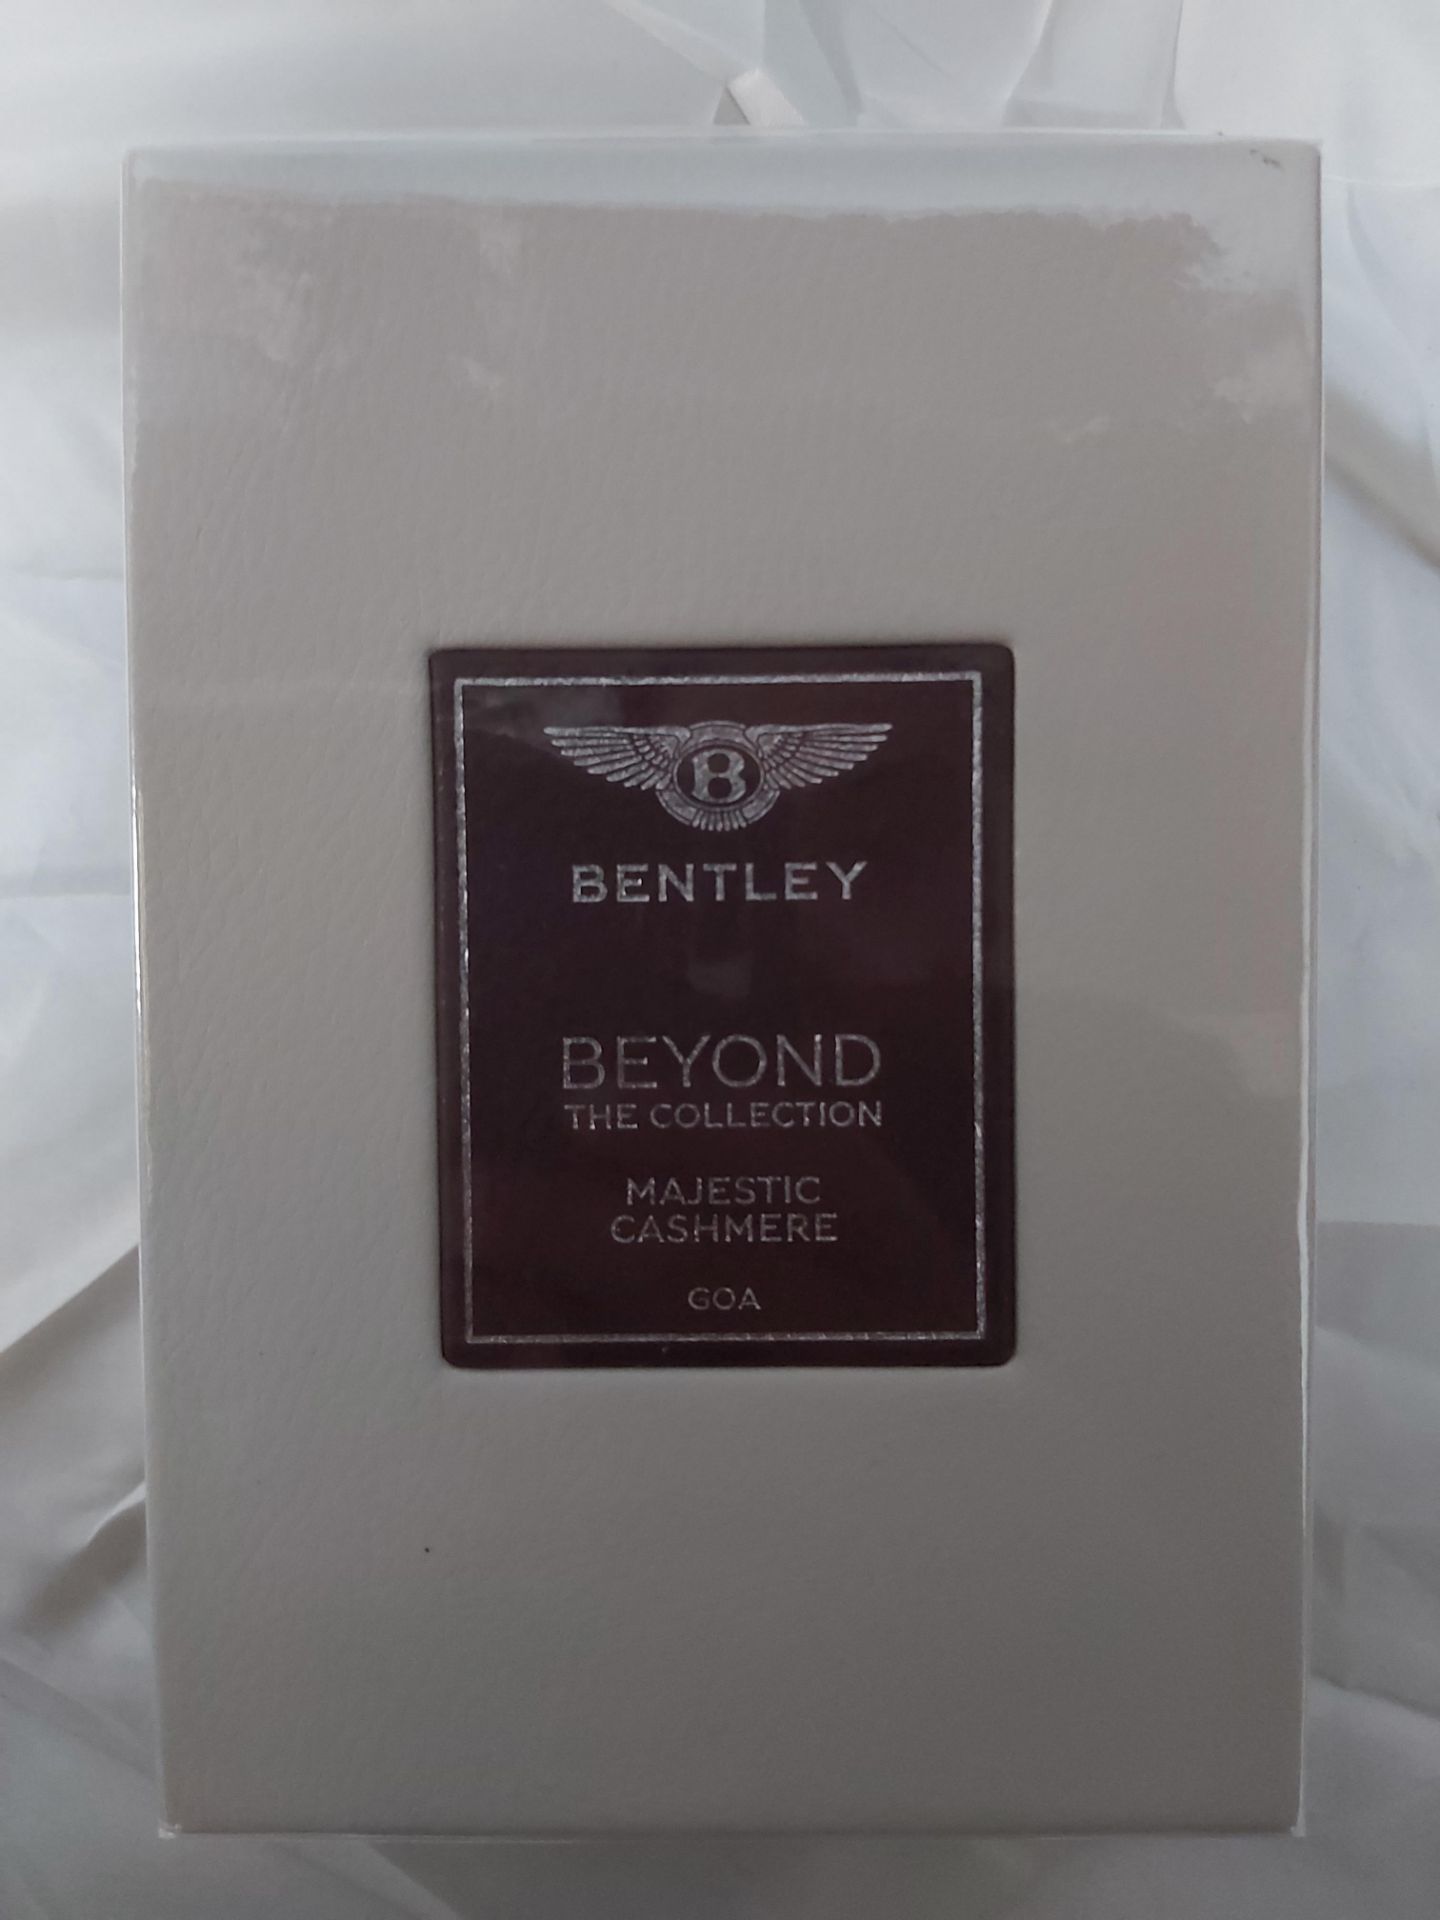 10 x Bentley Beyond The Collection Majestic Cashmere 100ml EDP. Condition New & Sealed. (RRP £1600). - Image 2 of 3